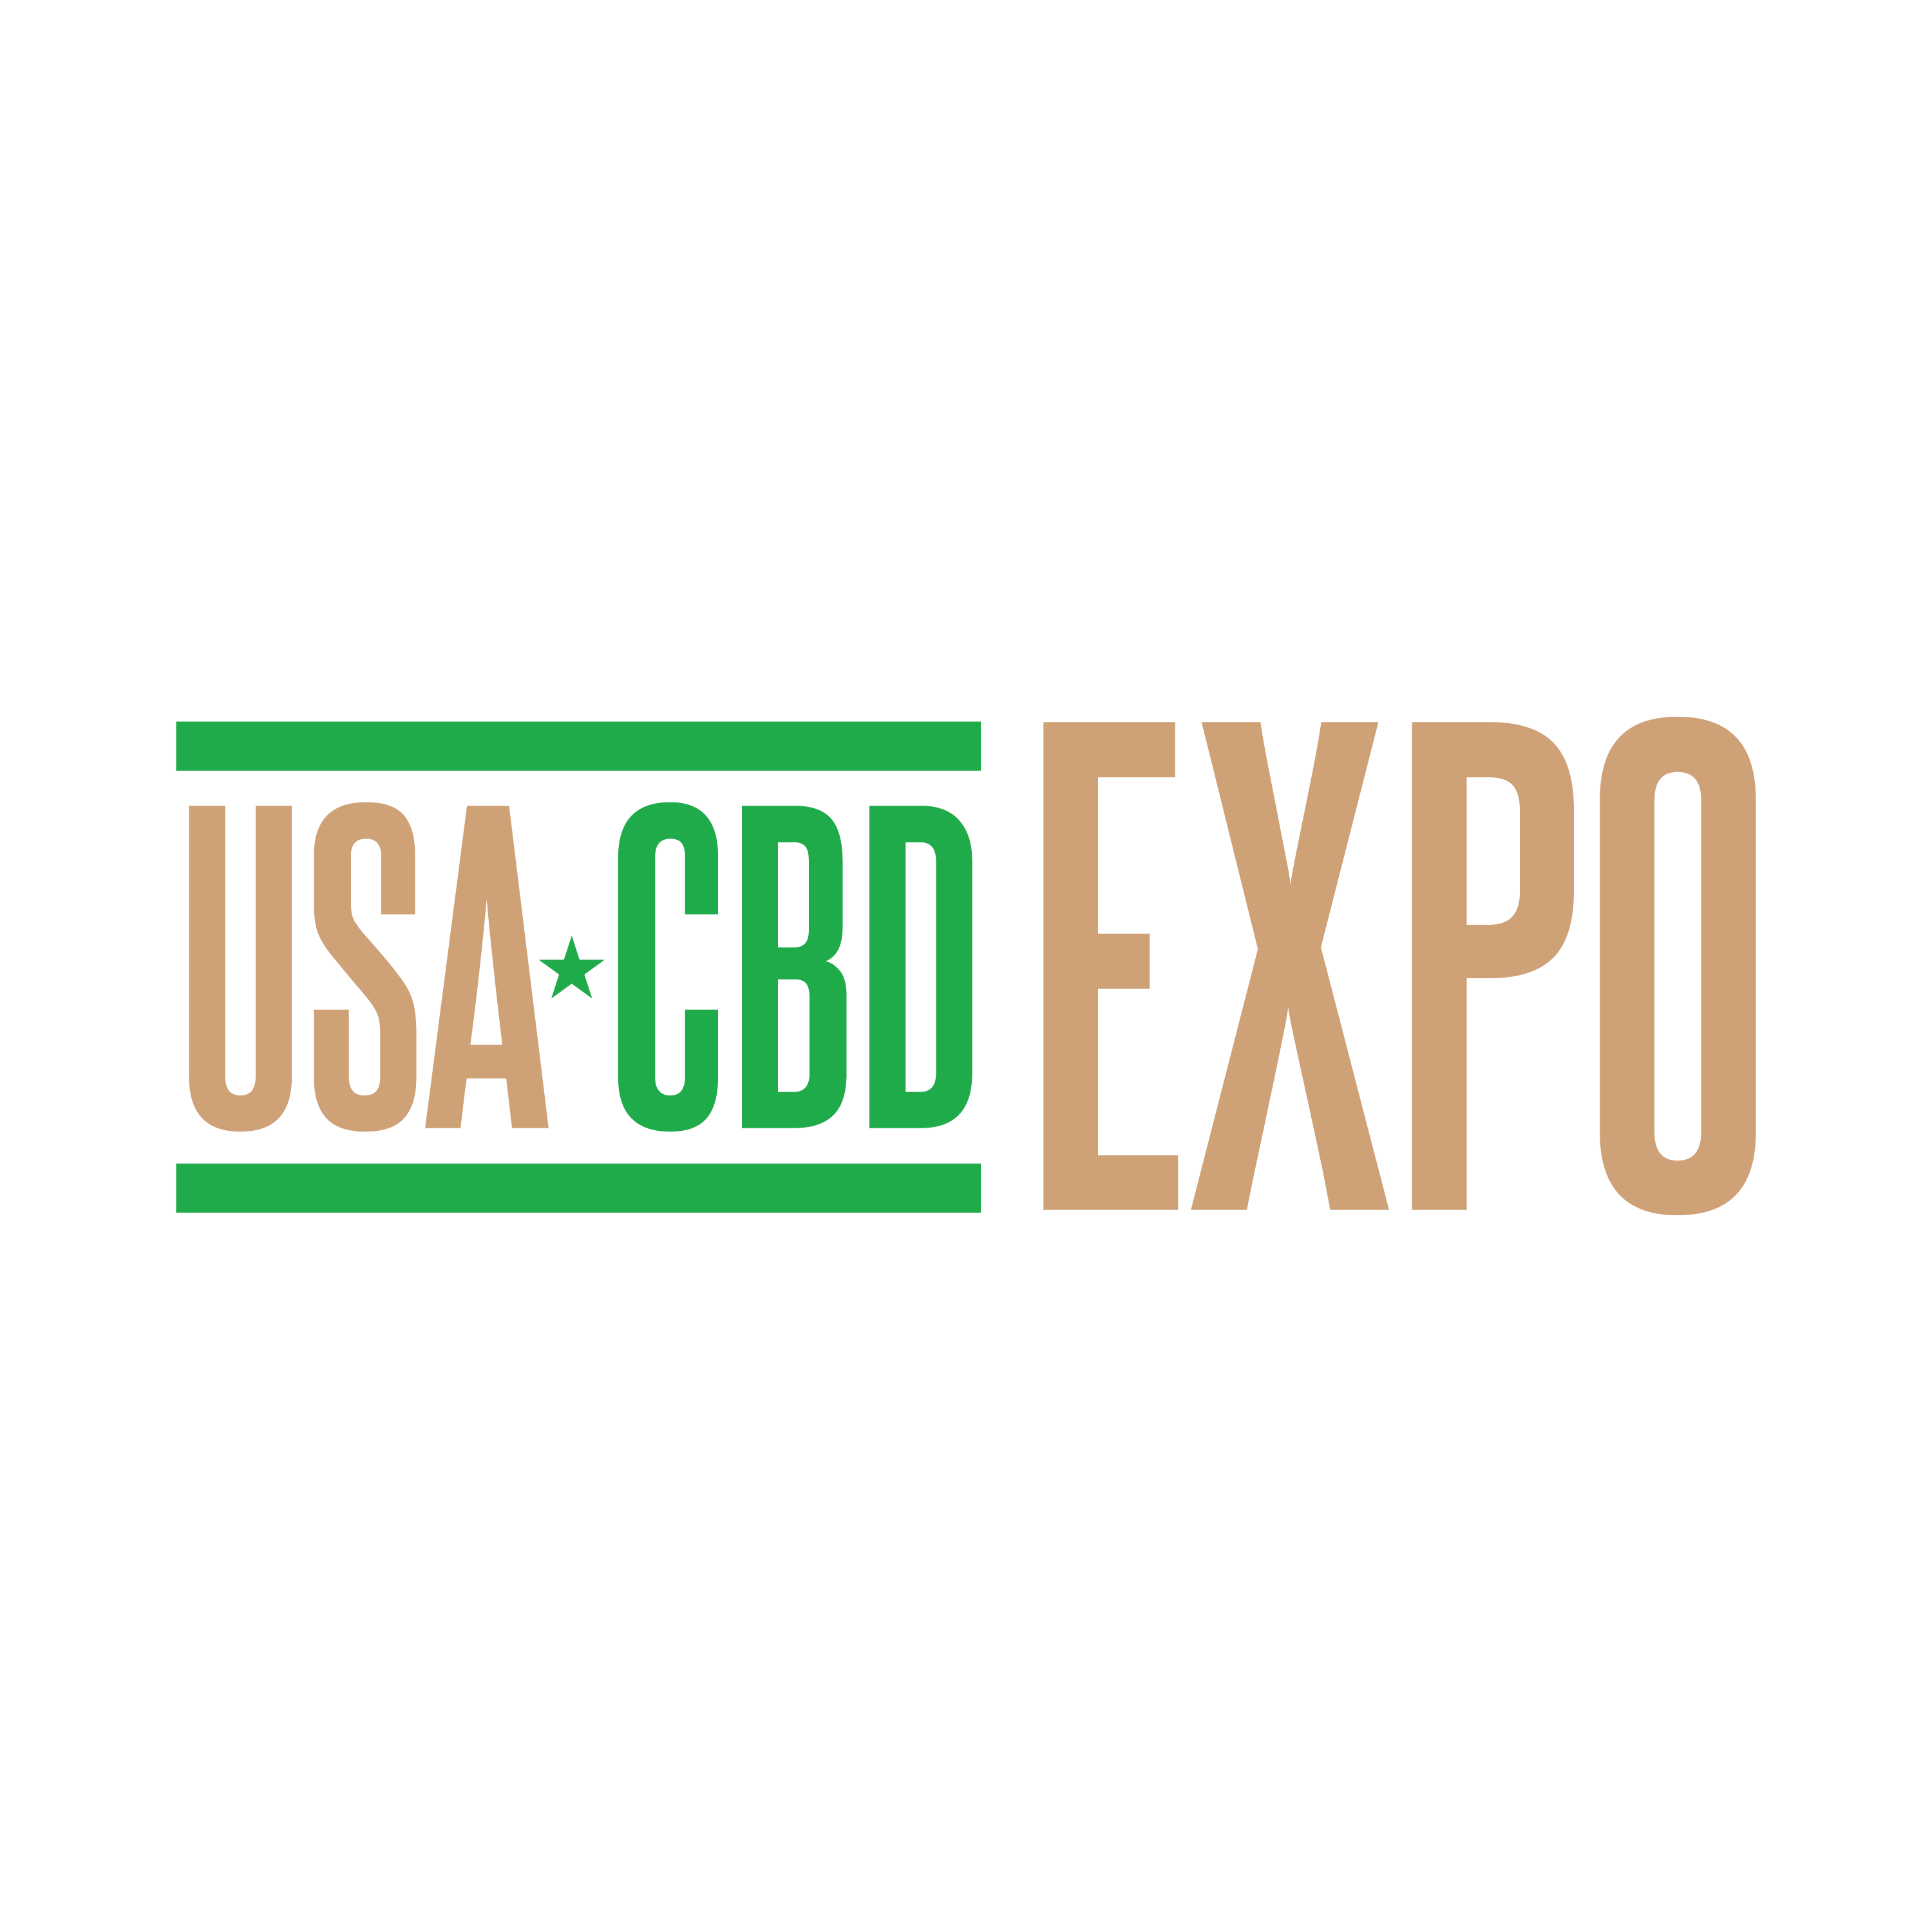 Episode 16: 3 Challenge for CBD Products in 2020